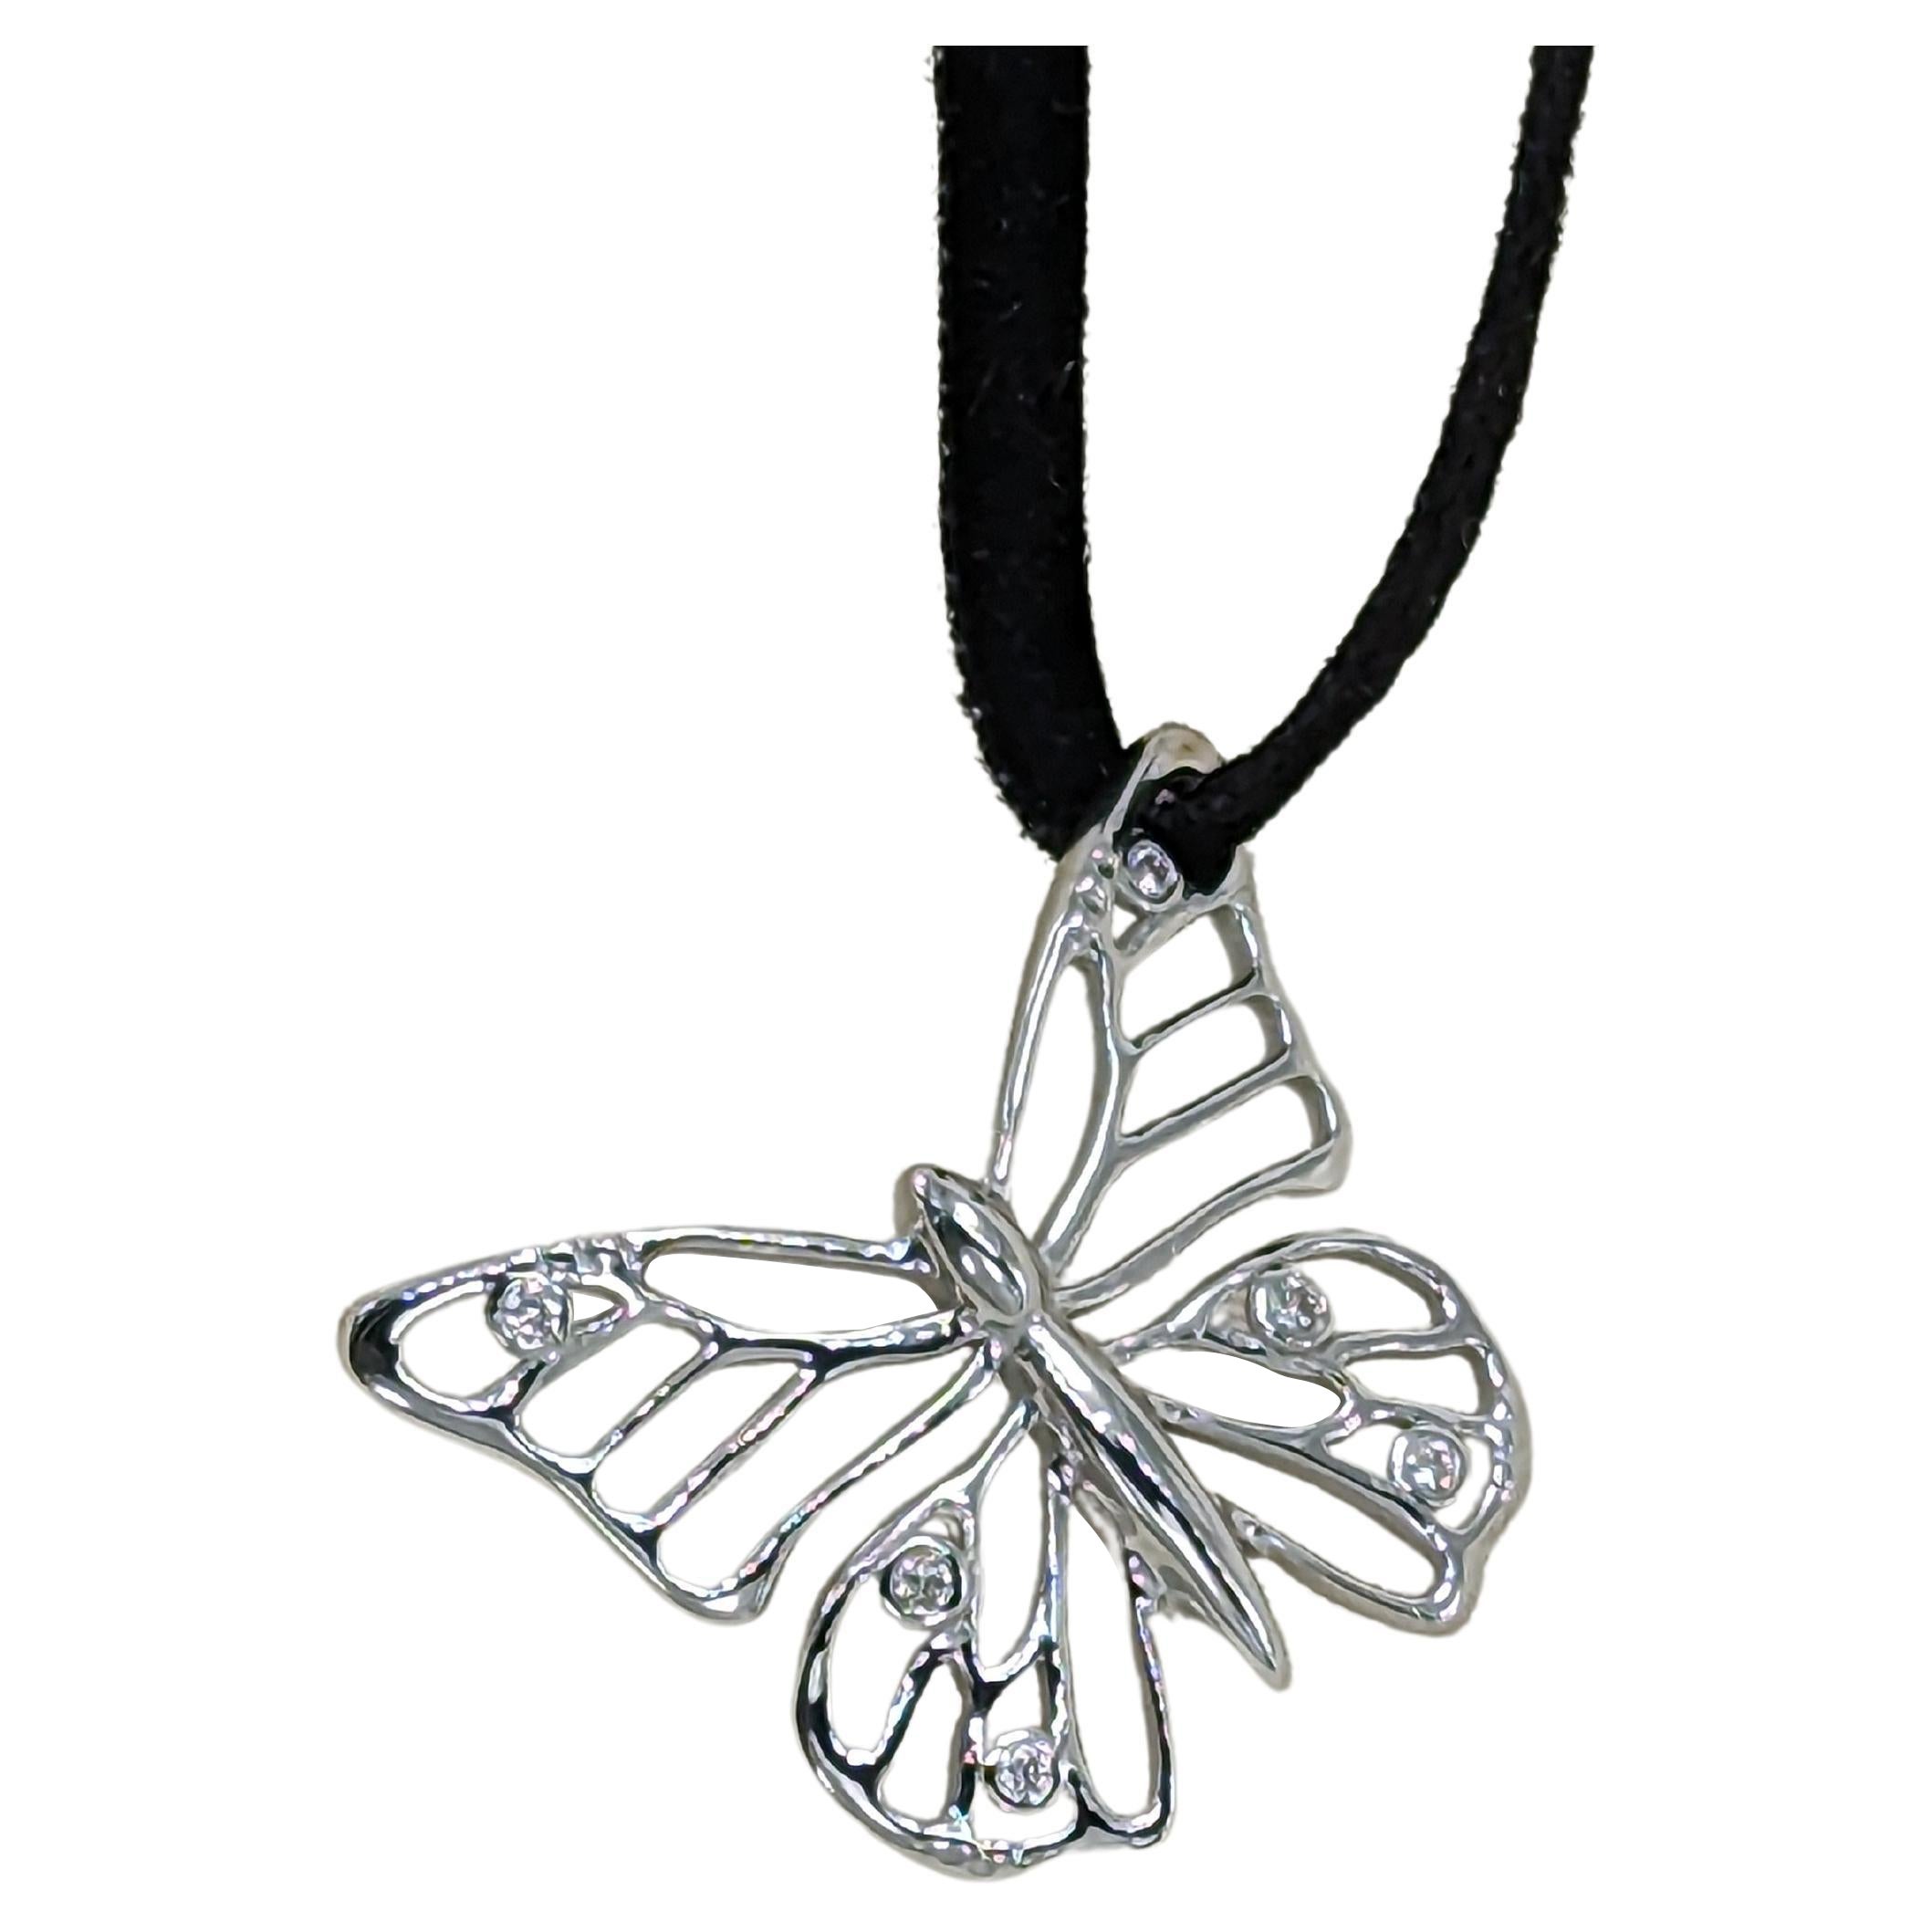 14 Karat White Gold Monarch Butterfly and GIA Diamonds Pendant Necklace